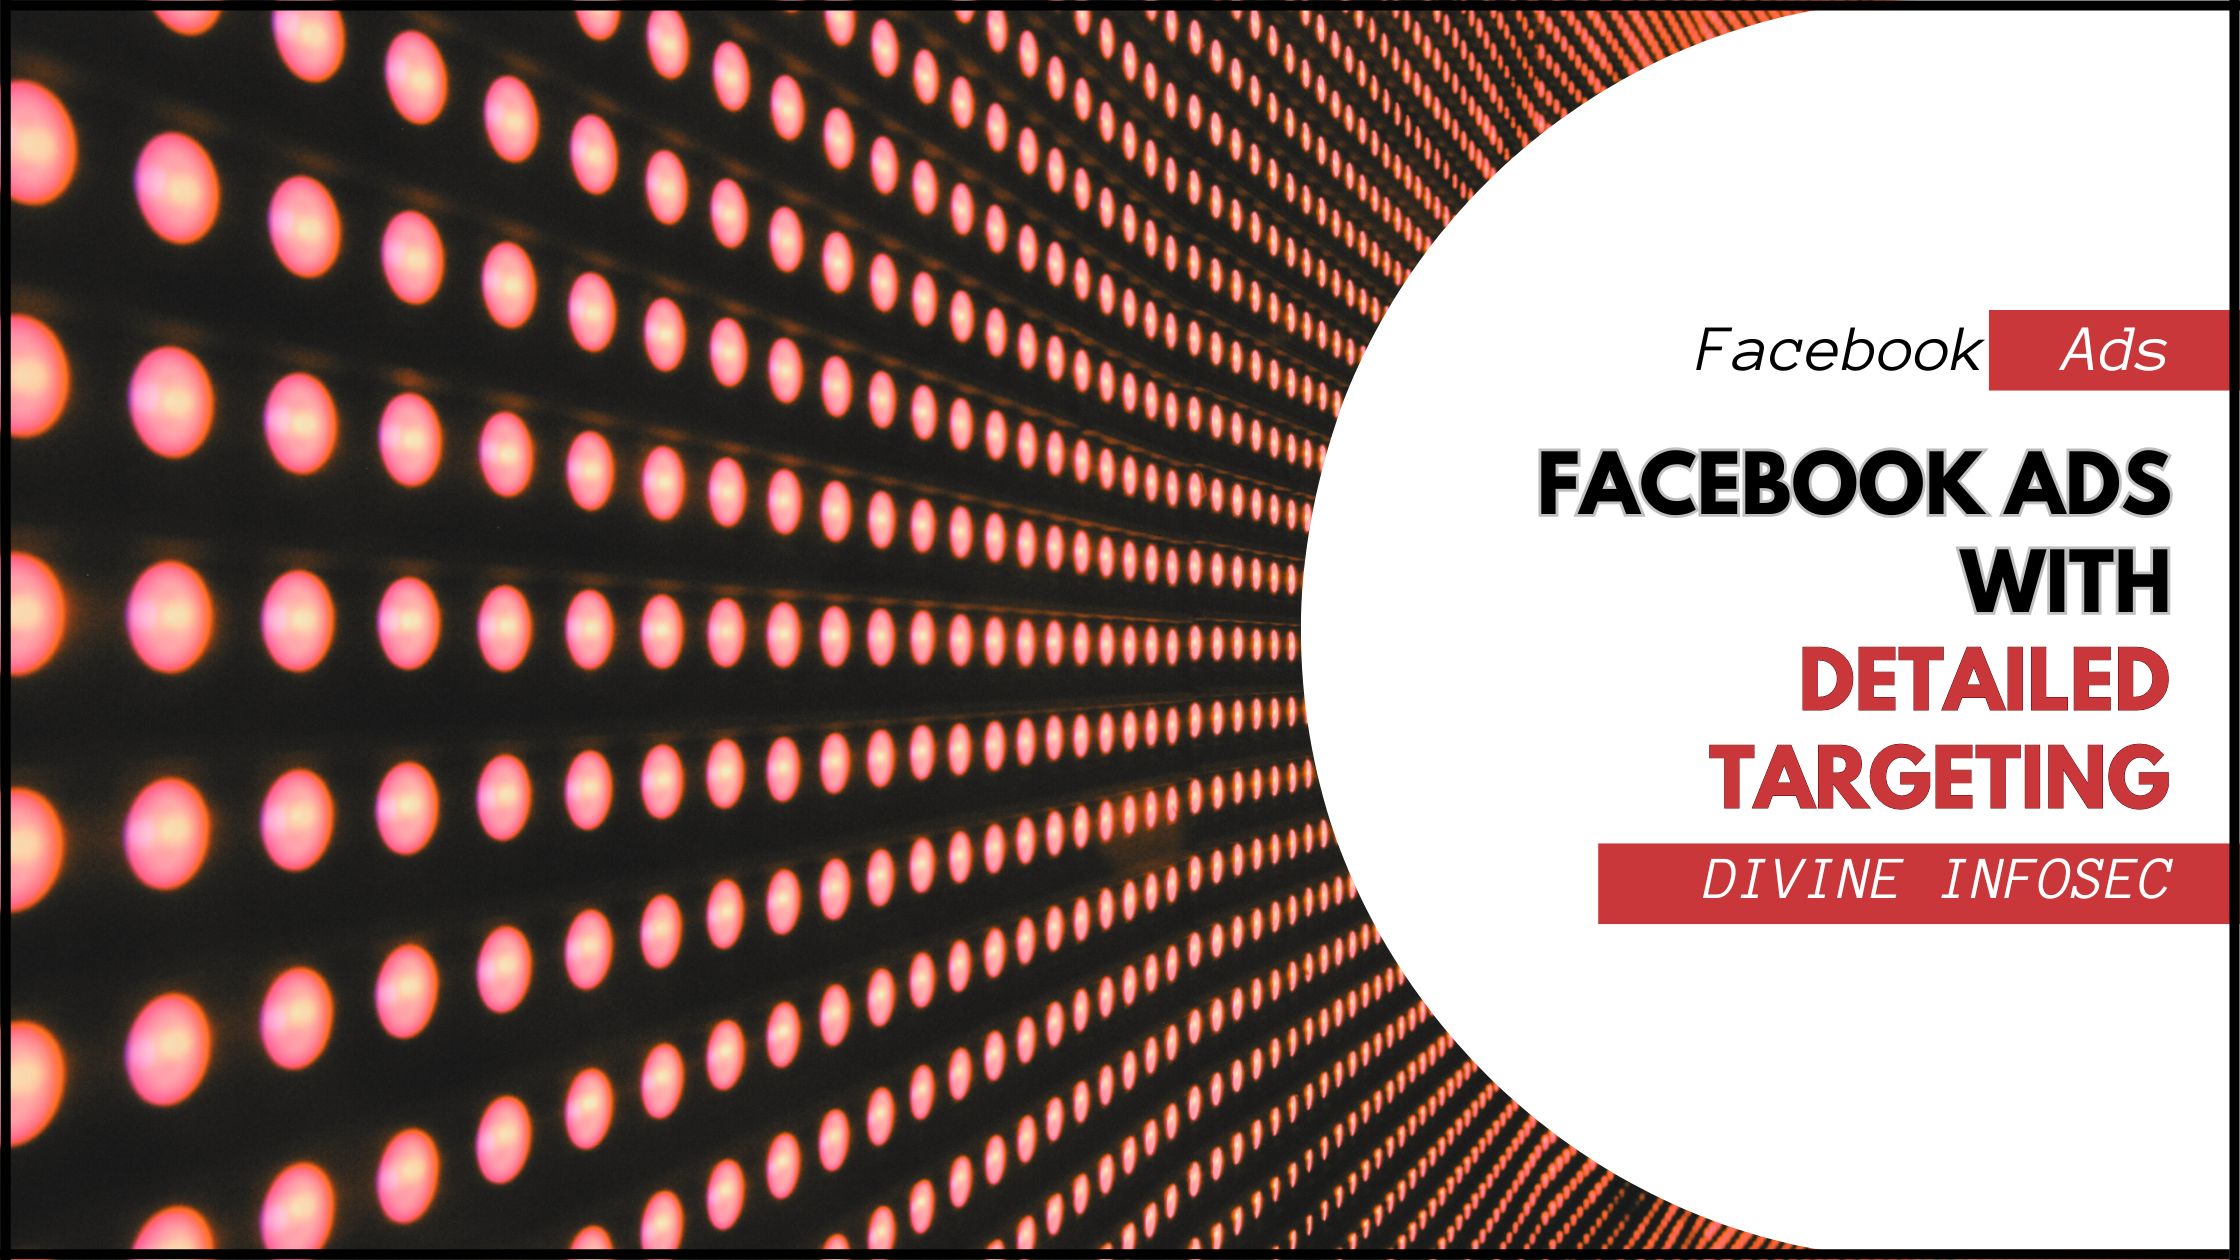 Target facebook ads based on job titles and industries